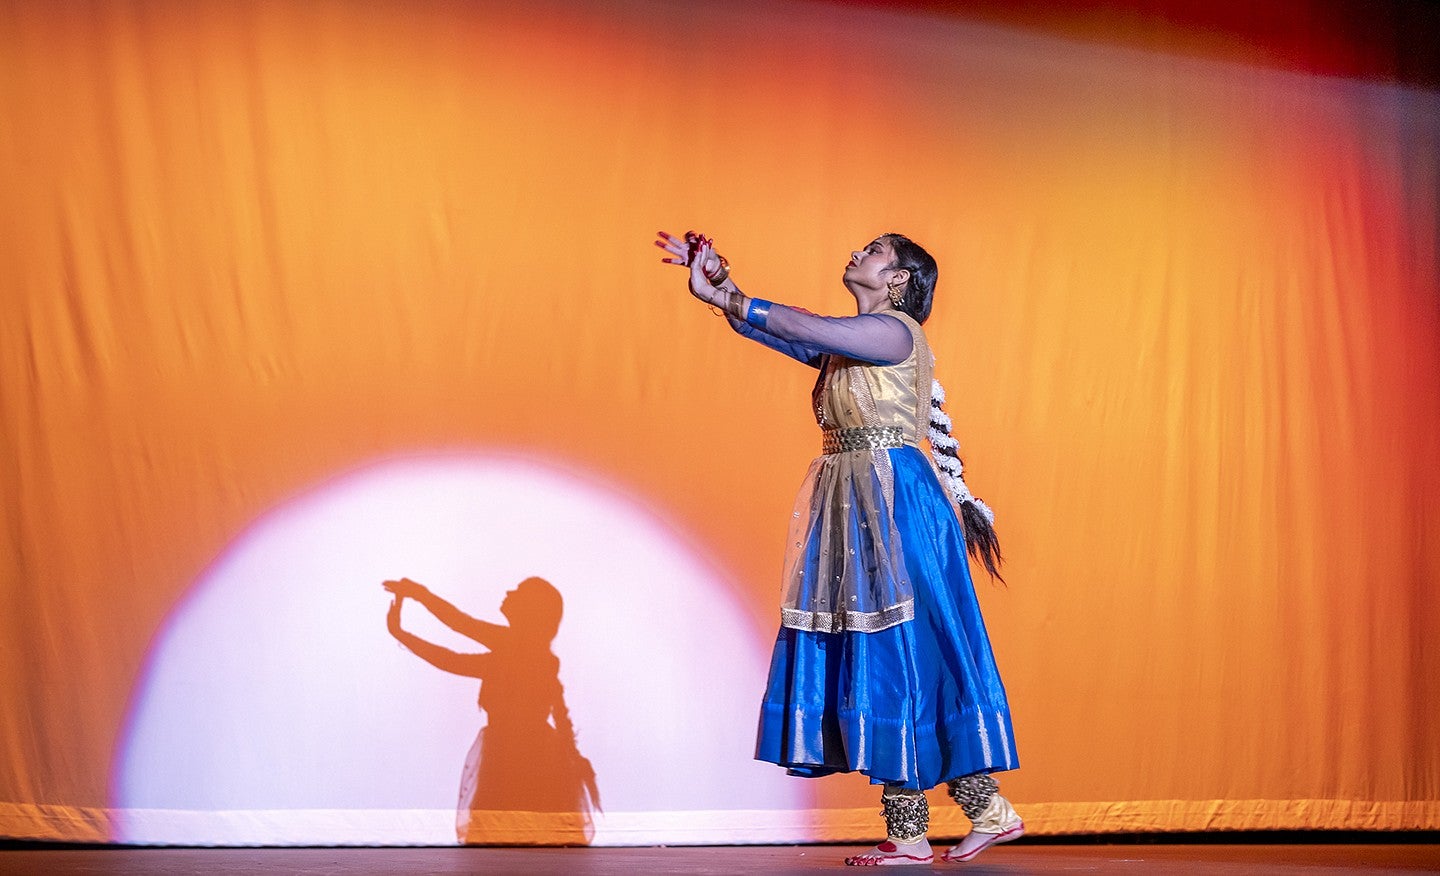 student gayatri misra dancing in traditional indian attire on stage in front of orange background